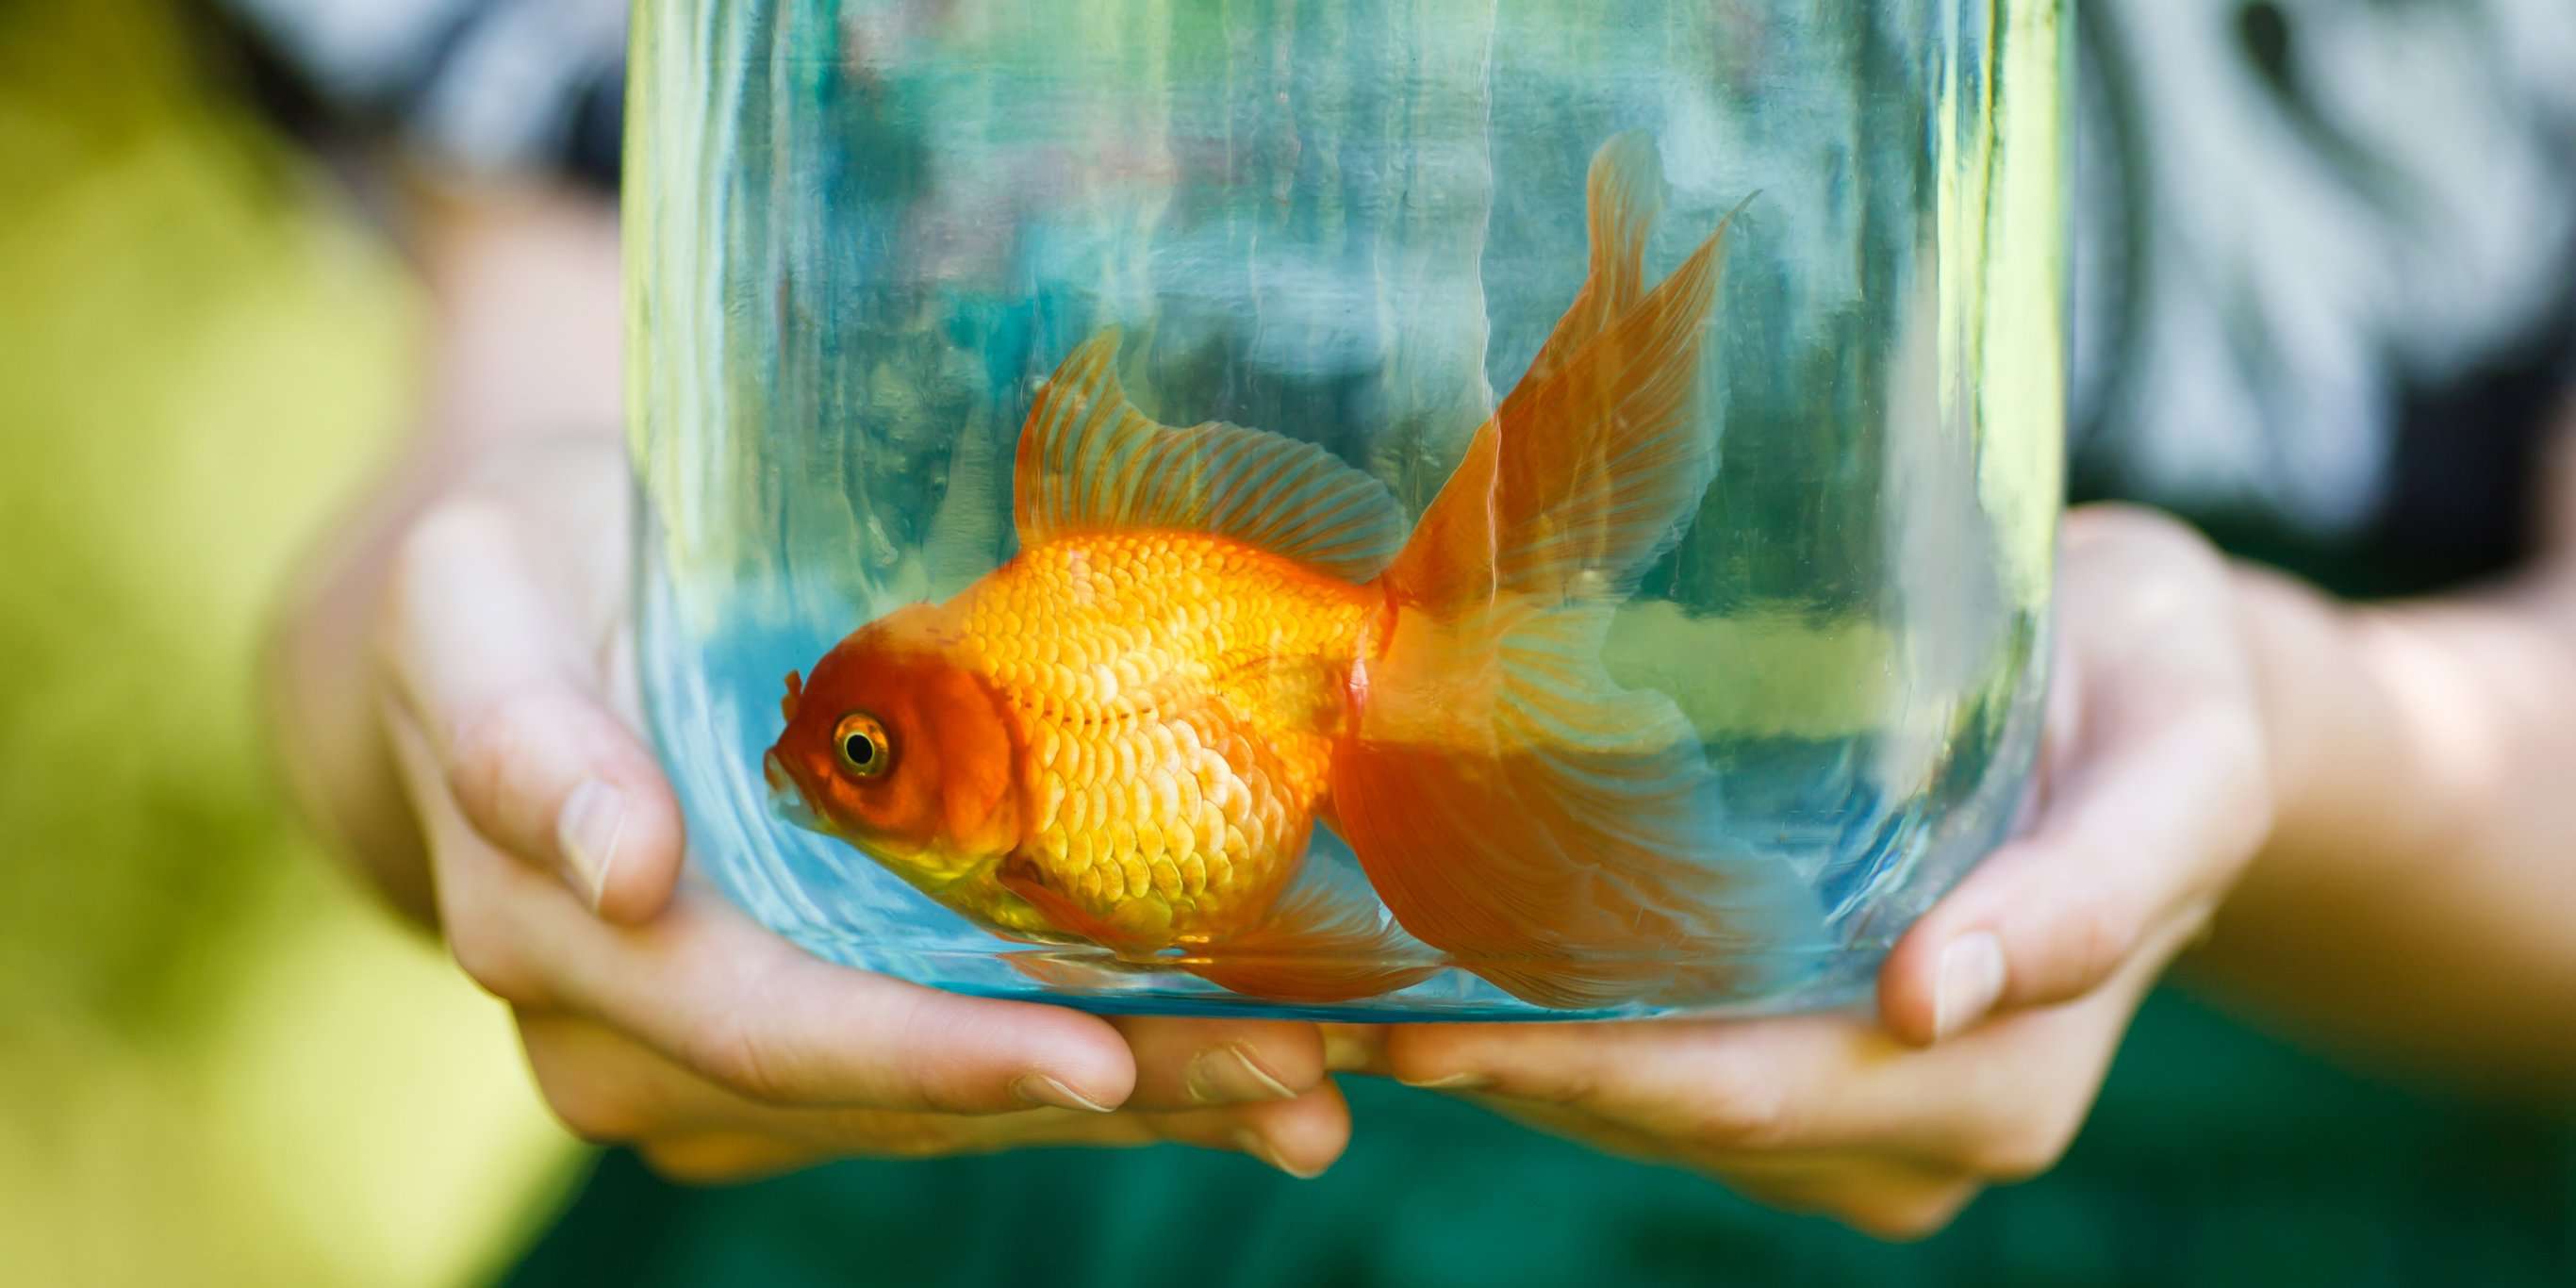 Taboola Ad Example 63927 - How To Keep Your Goldfish Alive For 15 Years